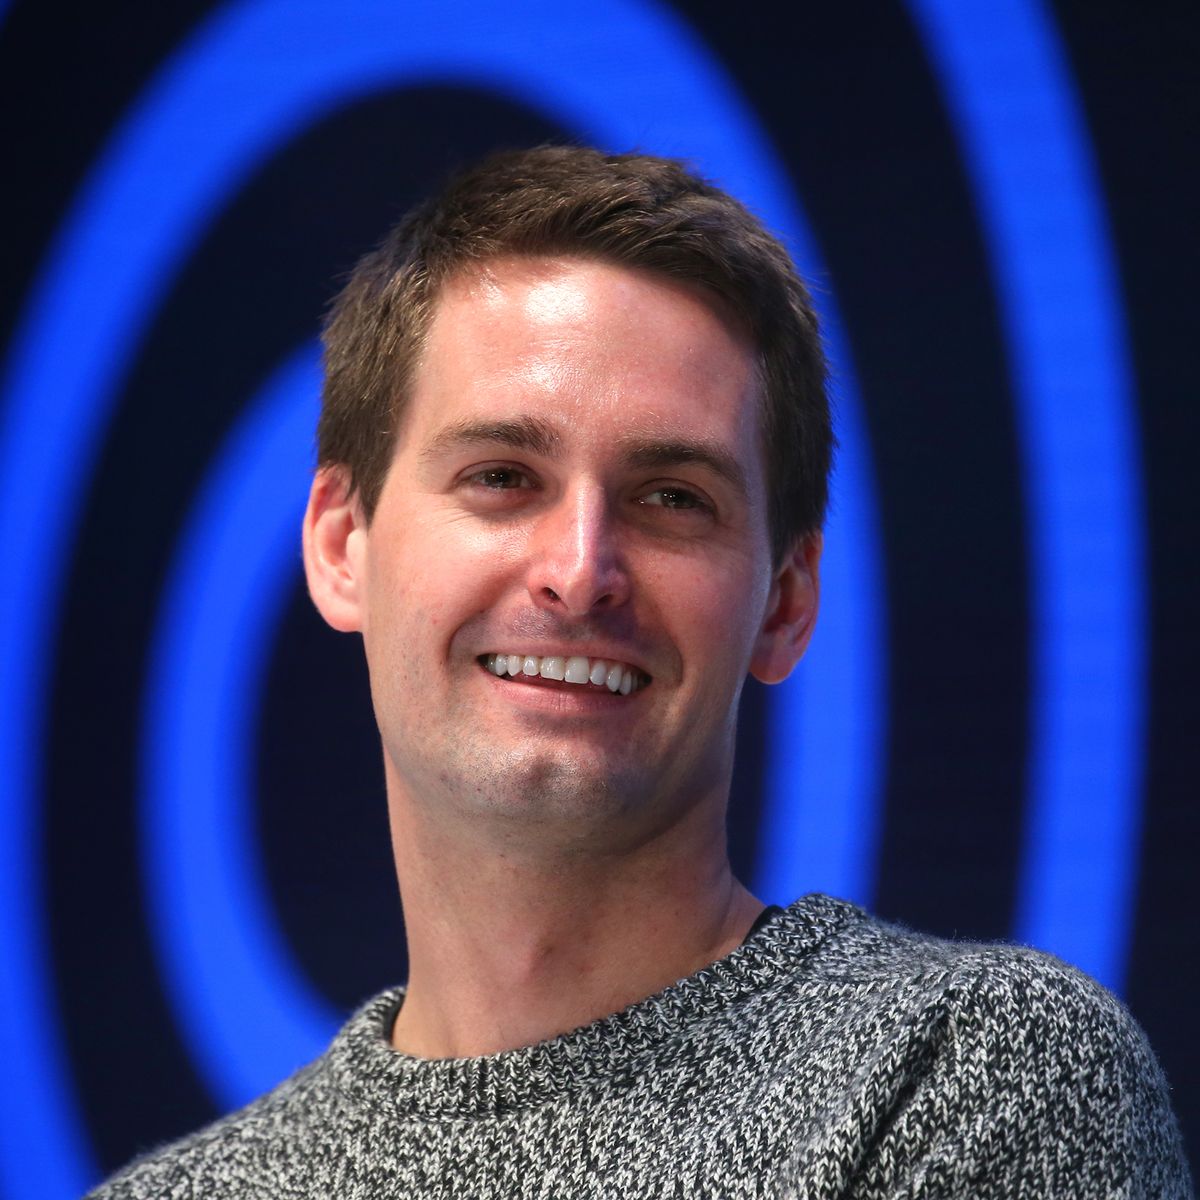 Evan Spiegel — Biography, Co-Founder and CEO of Snapchat